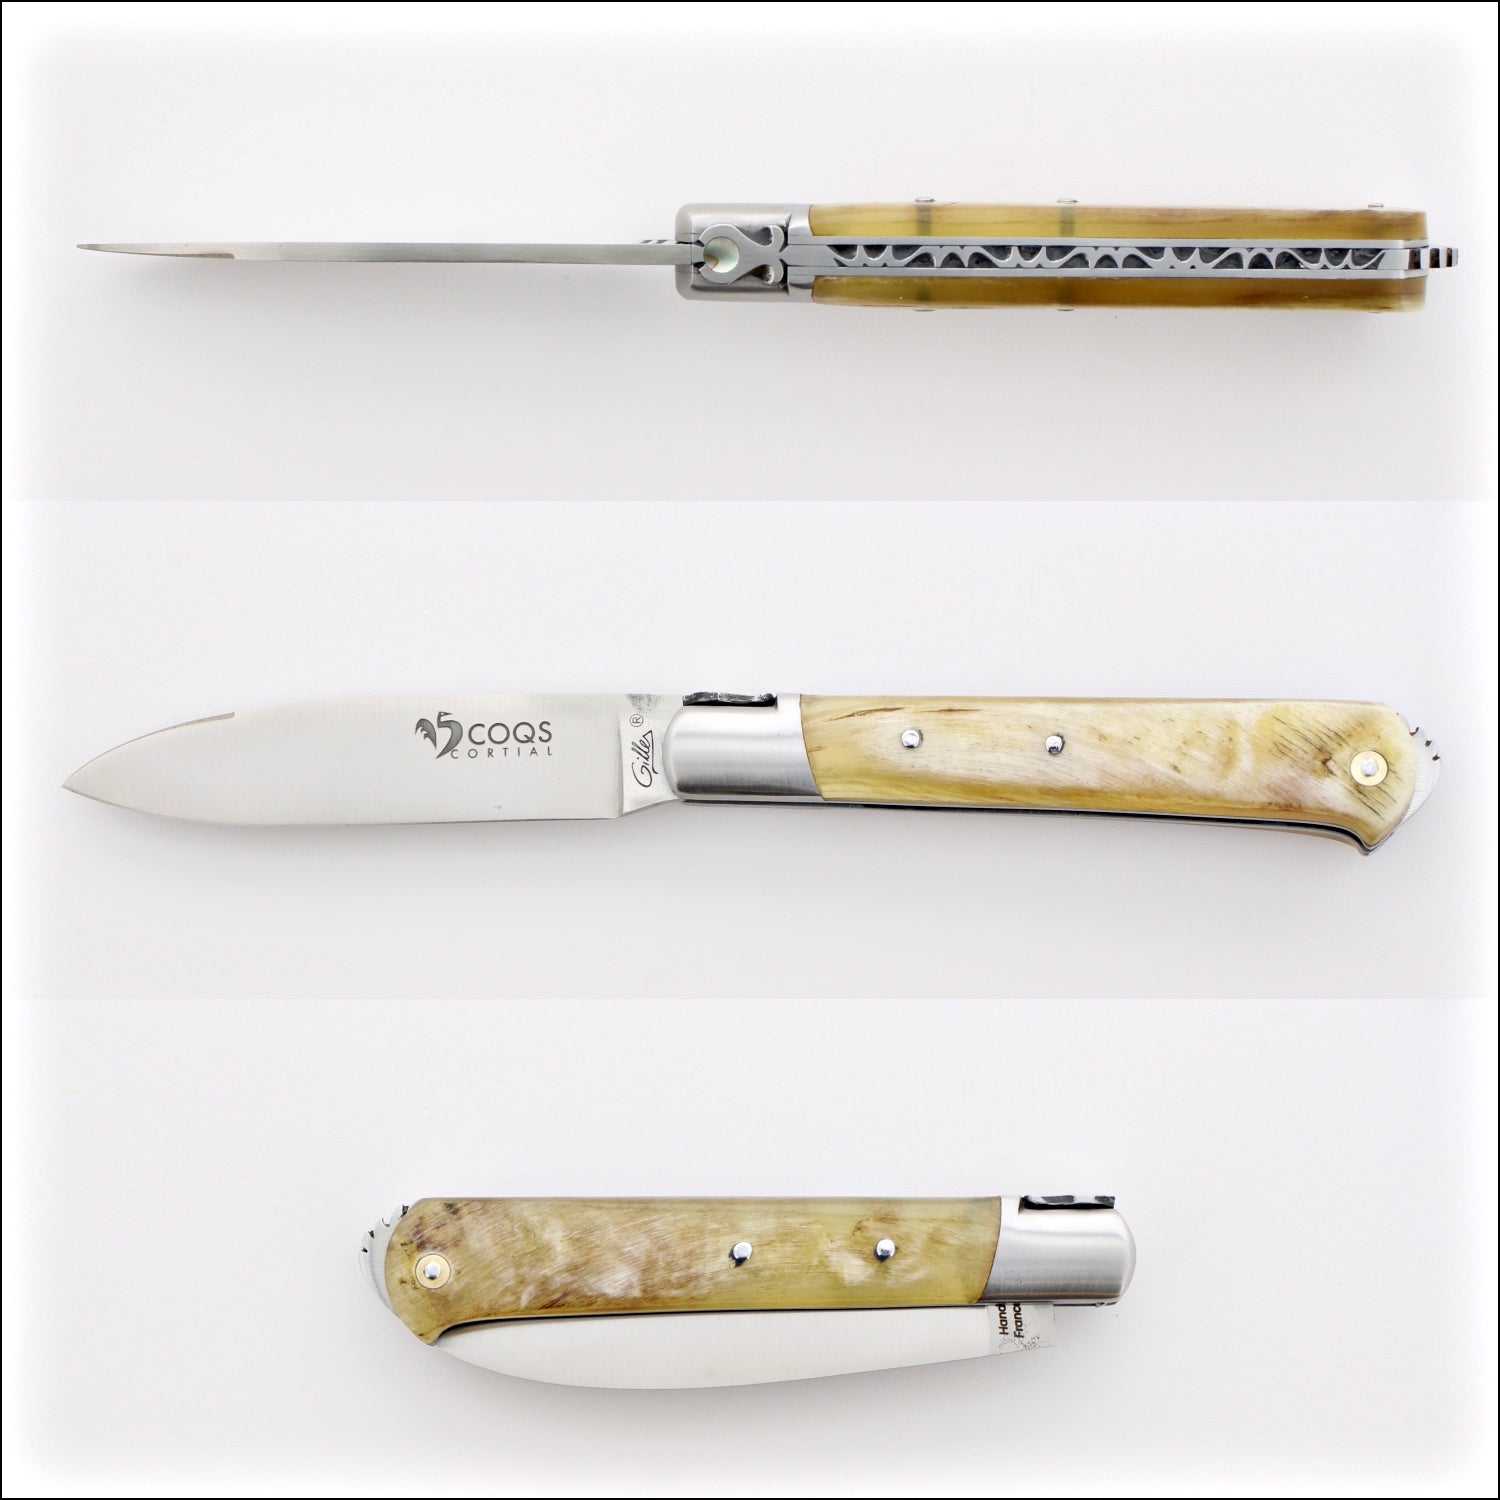 5 Coqs Pocket Knife - Ram Horn & Mother of Pearl Inlay